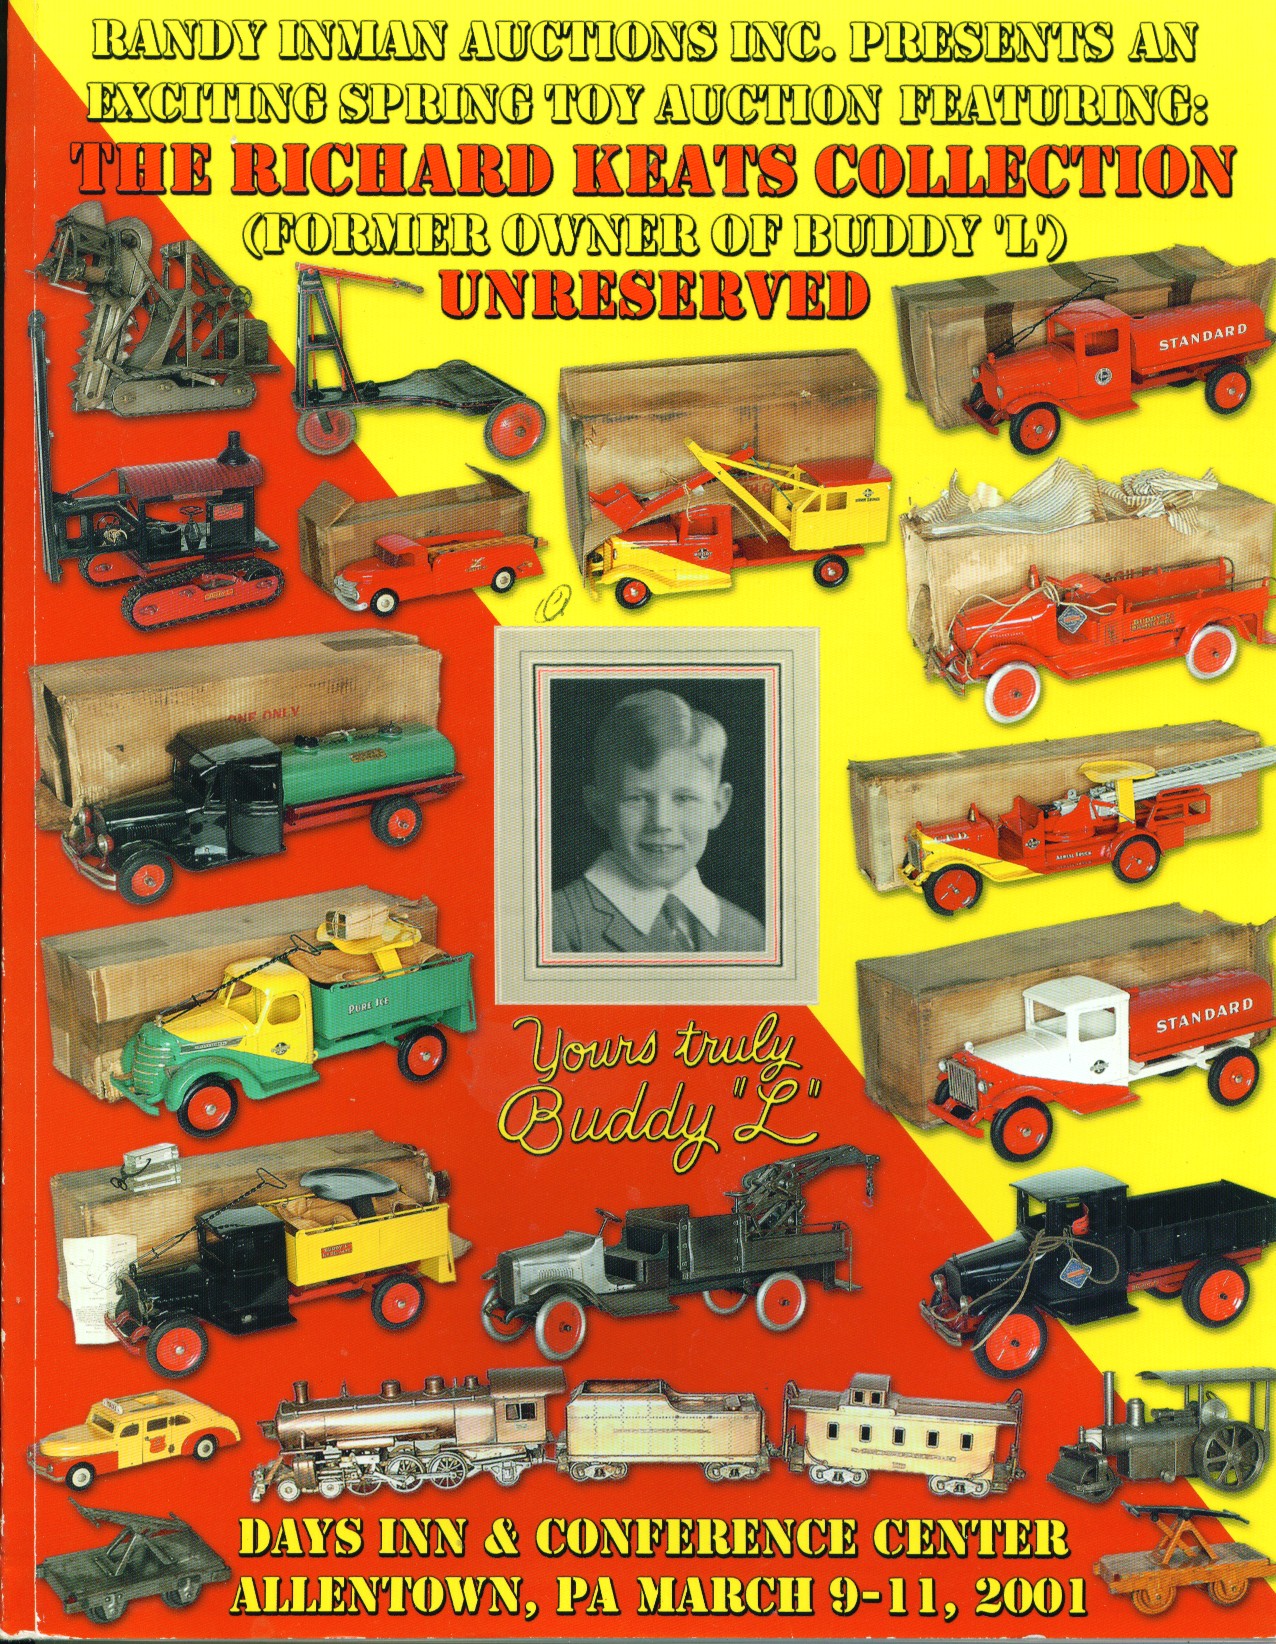 Inman Buddy L archive auction catalog